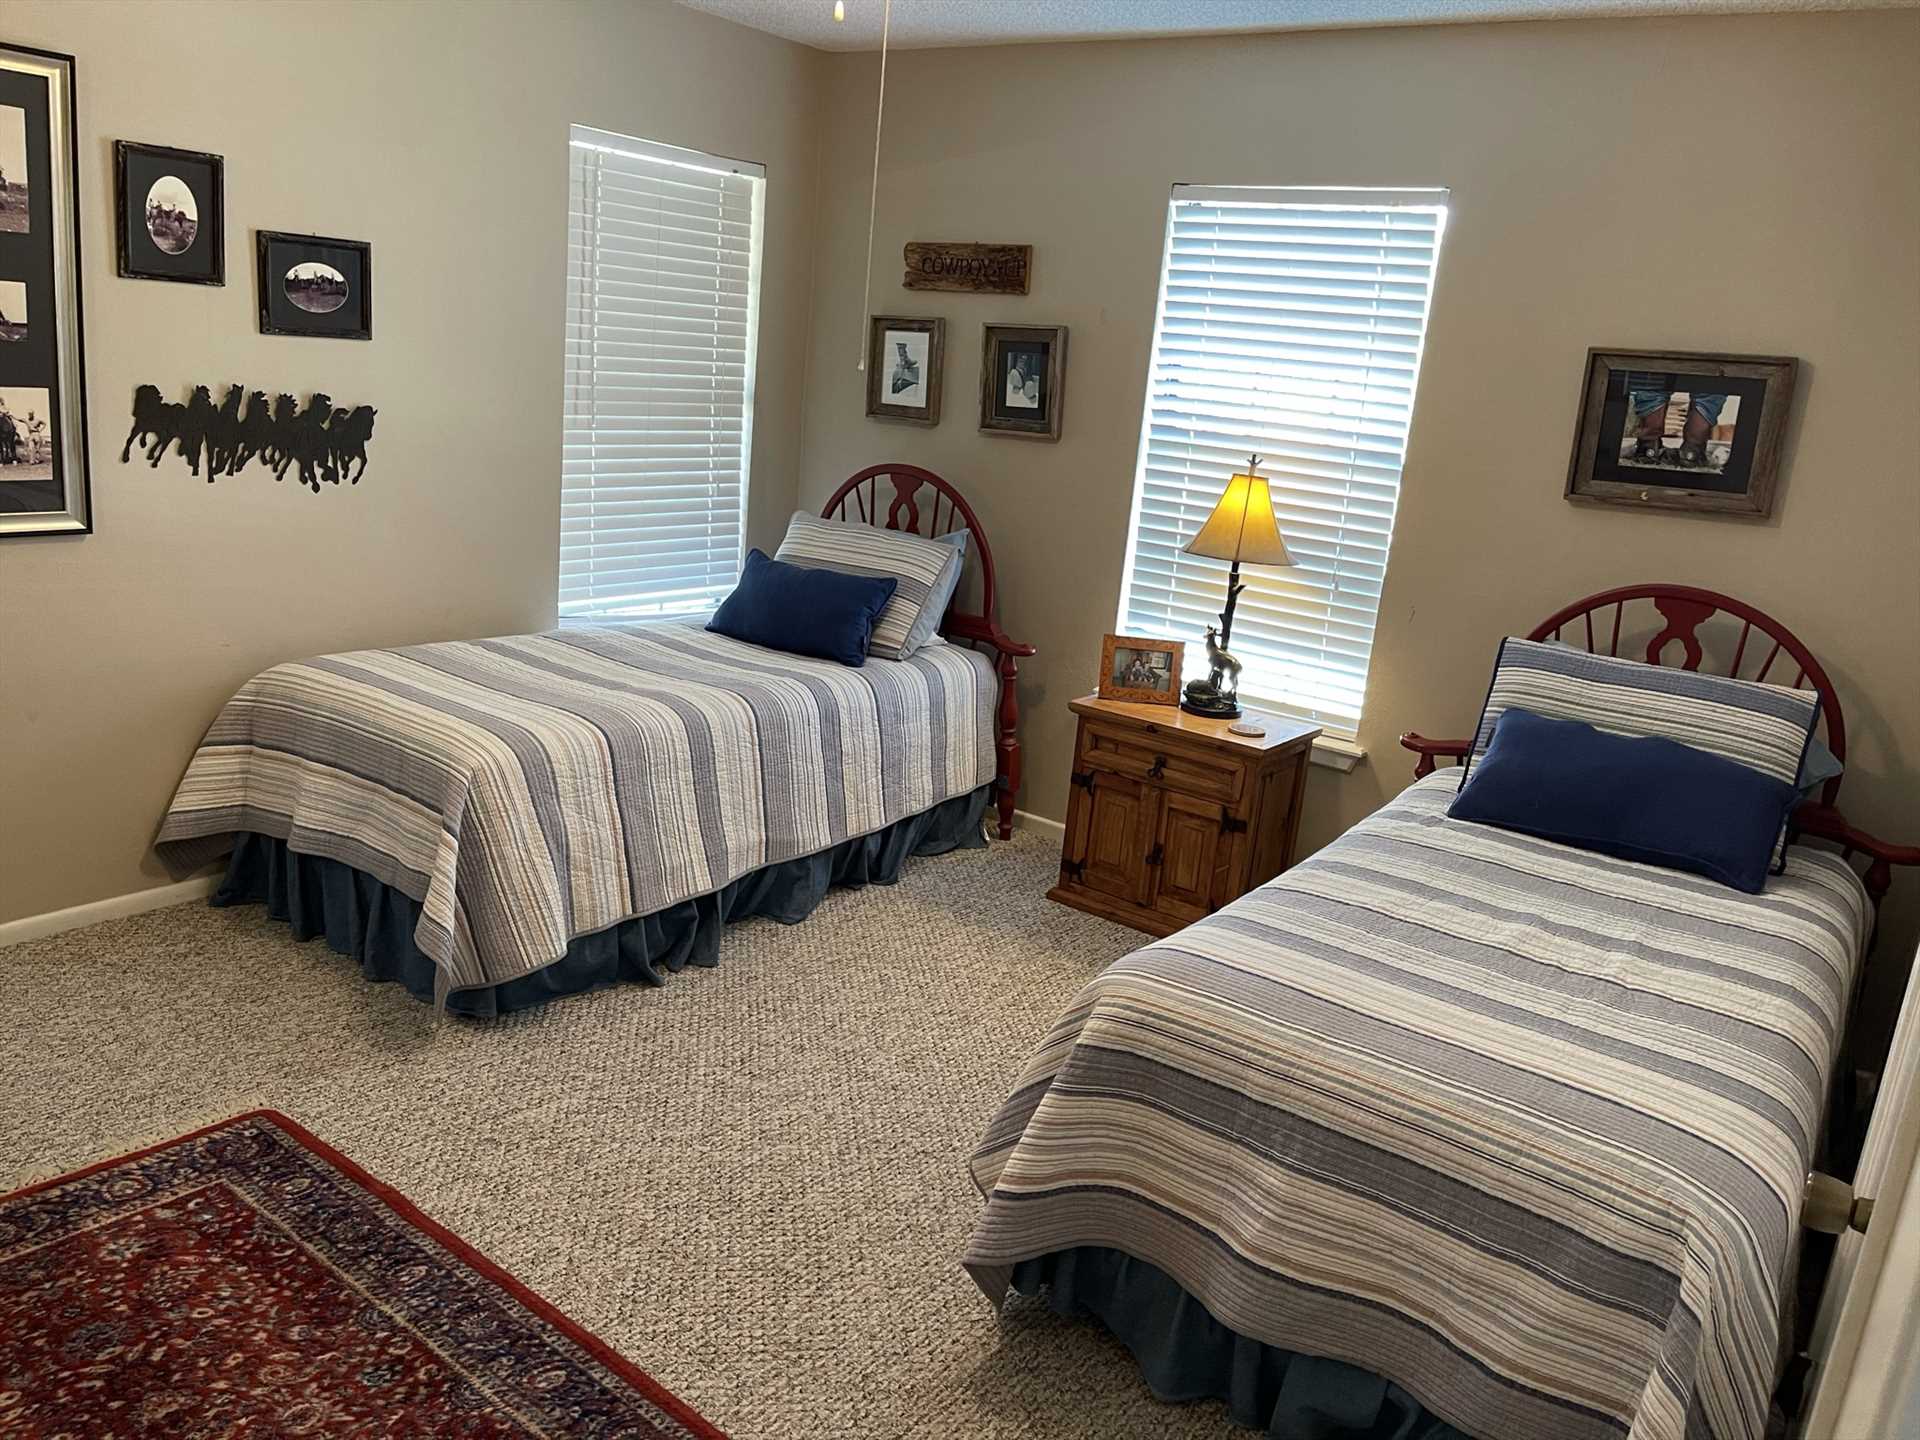                                                 Kids over ten are welcome here, and the matched twin beds in the third bedroom make for a perfect sleeping space for them.